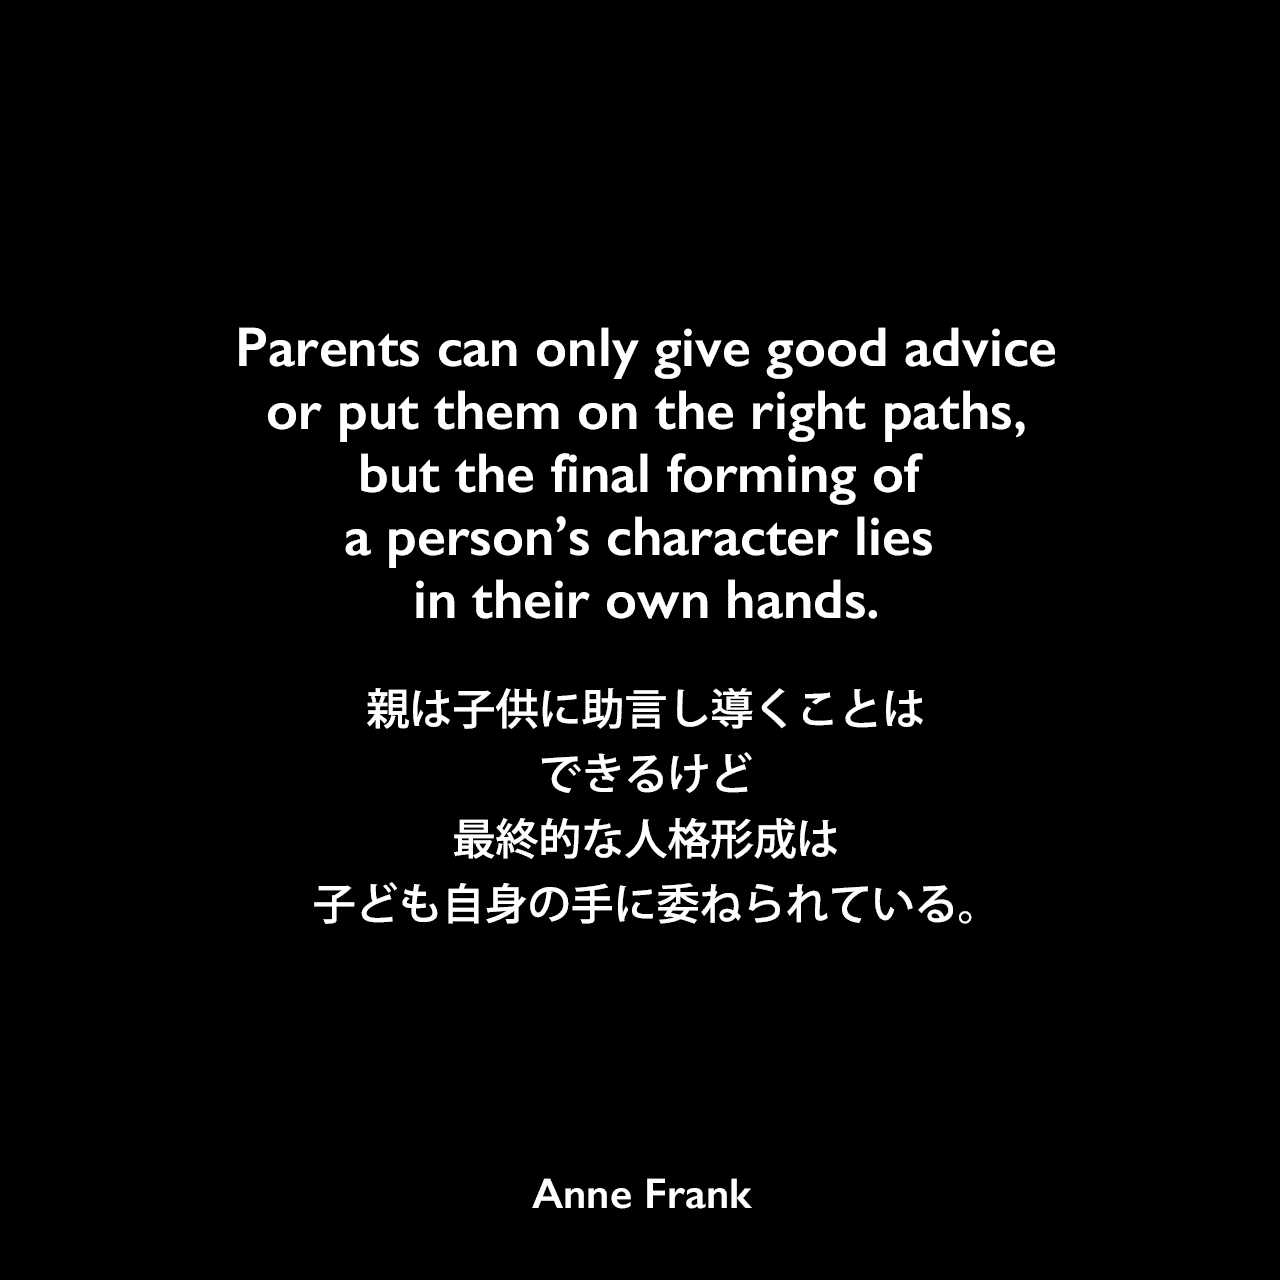 Parents can only give good advice or put them on the right paths, but the final forming of a person’s character lies in their own hands.親は子供に助言し導くことはできるけど、最終的な人格形成は子ども自身の手に委ねられている。- 「アンネの日記」よりAnne Frank